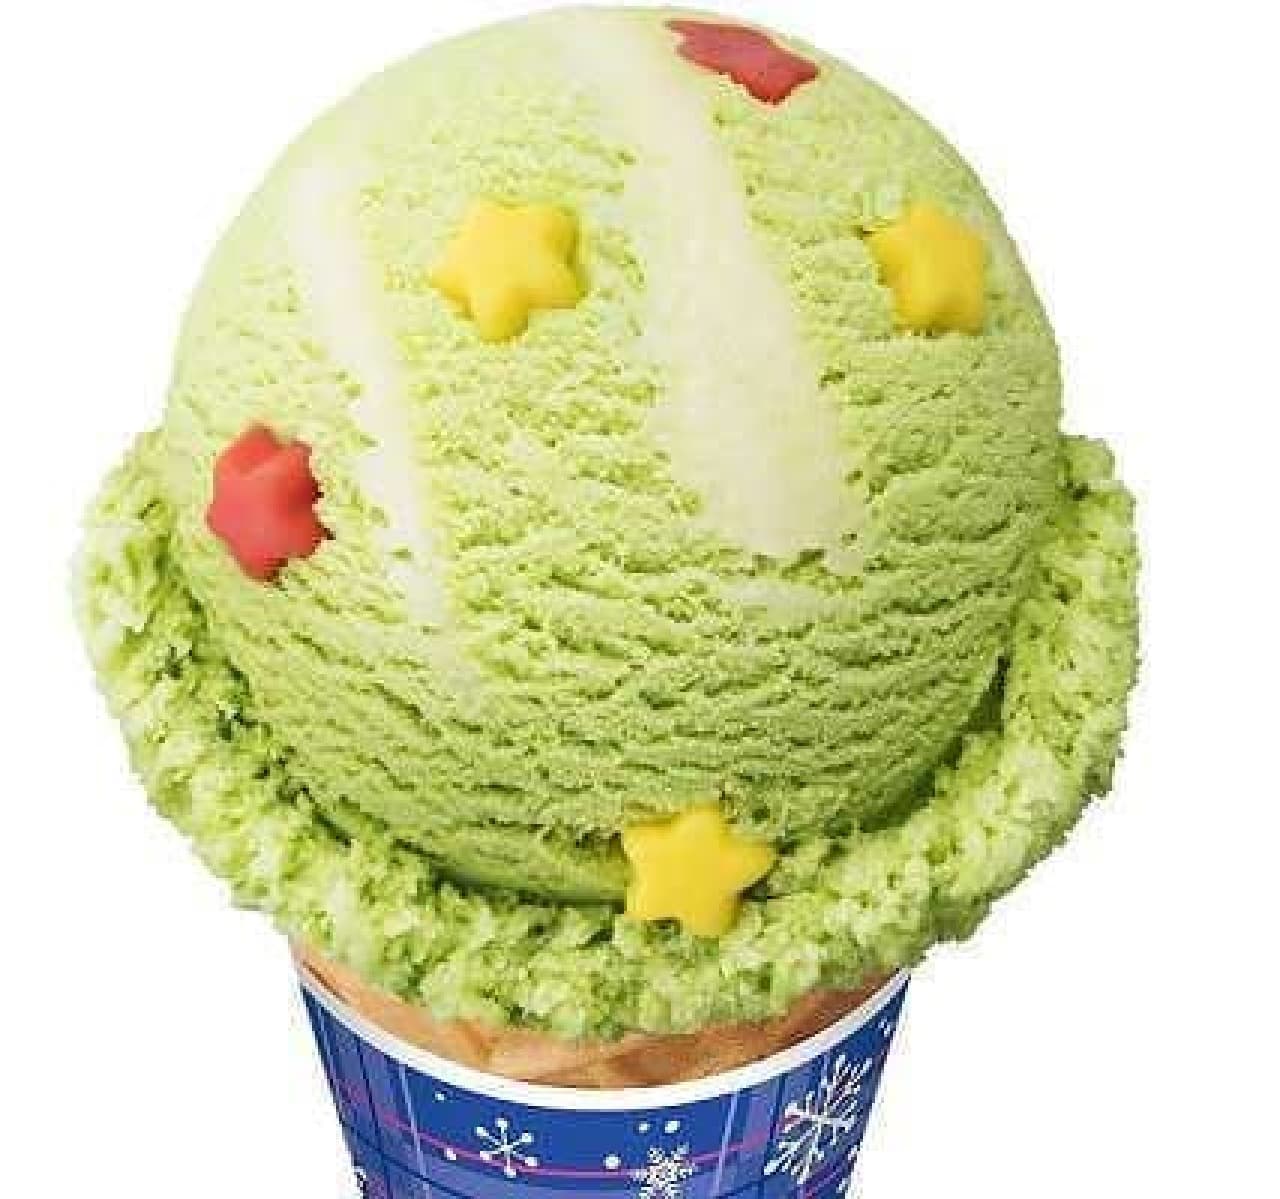 Limited time flavor "Twinkle Tree"